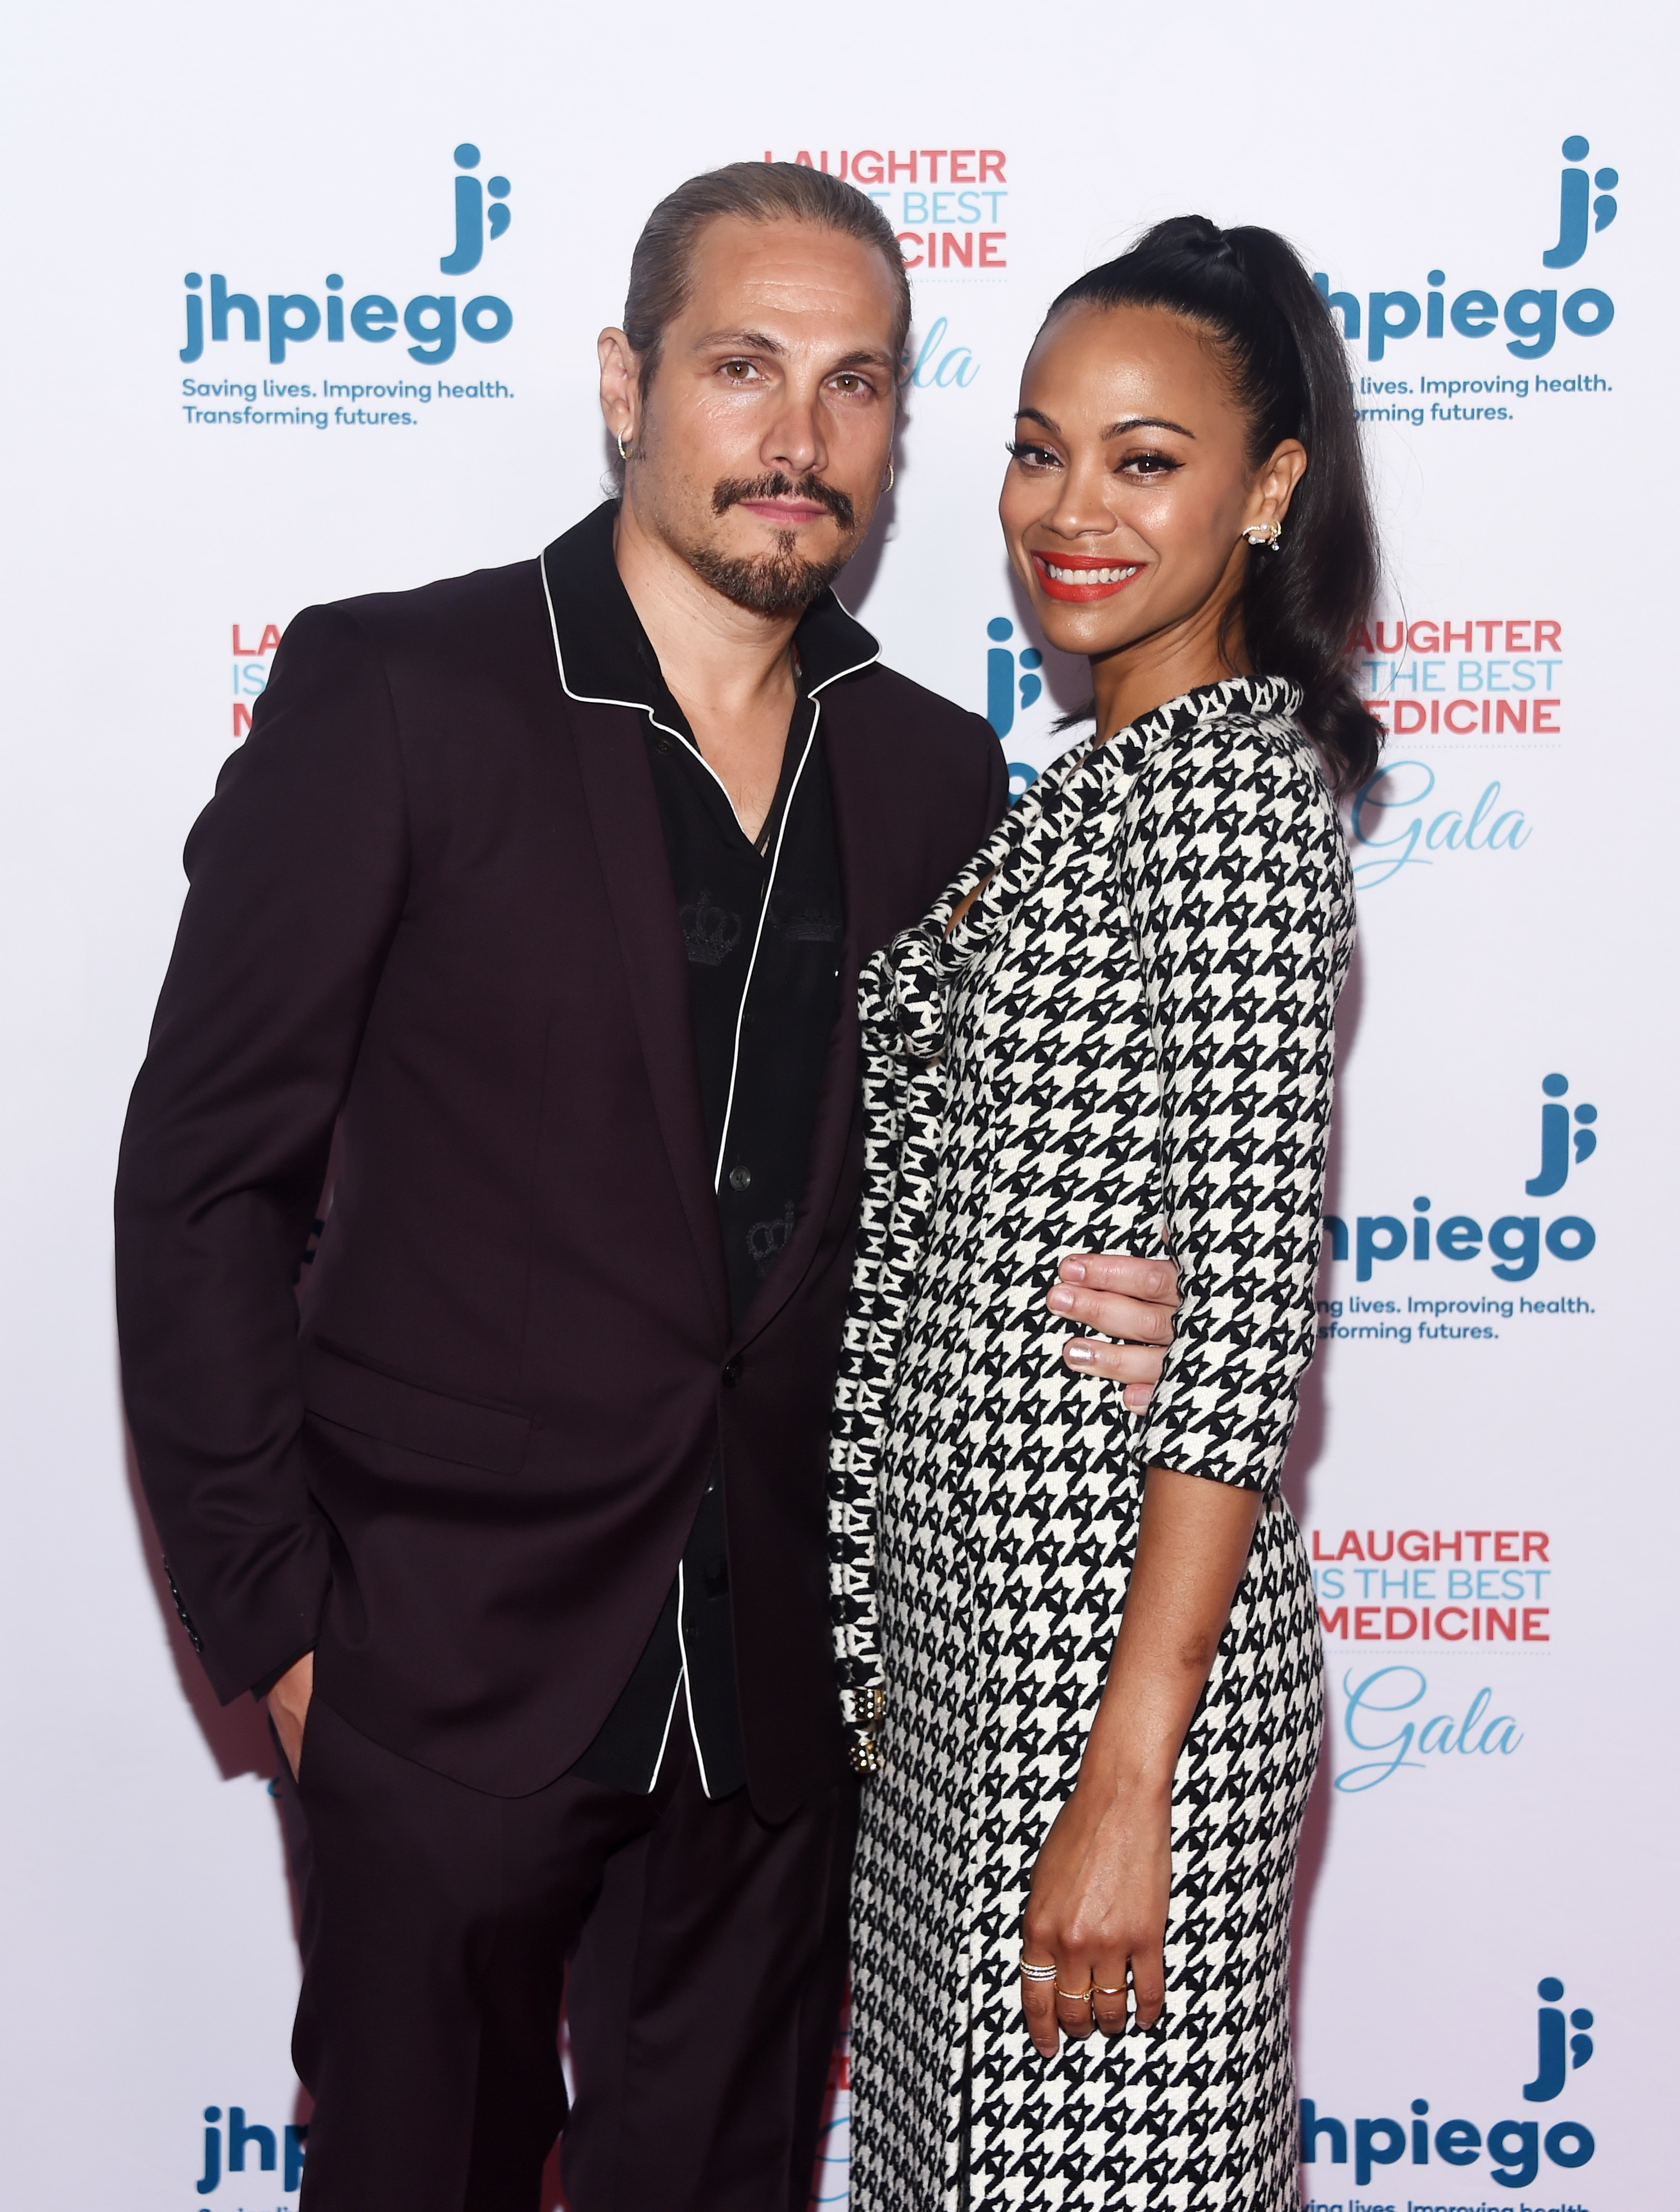 <p>It was love at first sight for these two! "I just saw him from behind. It was 6:30 in the morning, I was on a flight to New York," <a href="https://www.wonderwall.com/celebrity/profiles/overview/zoe-saldana-1120.article">Zoe Saldana</a> told USA Today in 2015 of meeting artist husband Marco Perego. "And I can't even describe to you, it was a vibration. He turned in that moment, because he felt the vibration as well. I know people don't believe in it; I didn't believe in it. ... It was enough that I felt it. And that was it." The couple have been married since 2013 and have three kids together.</p>